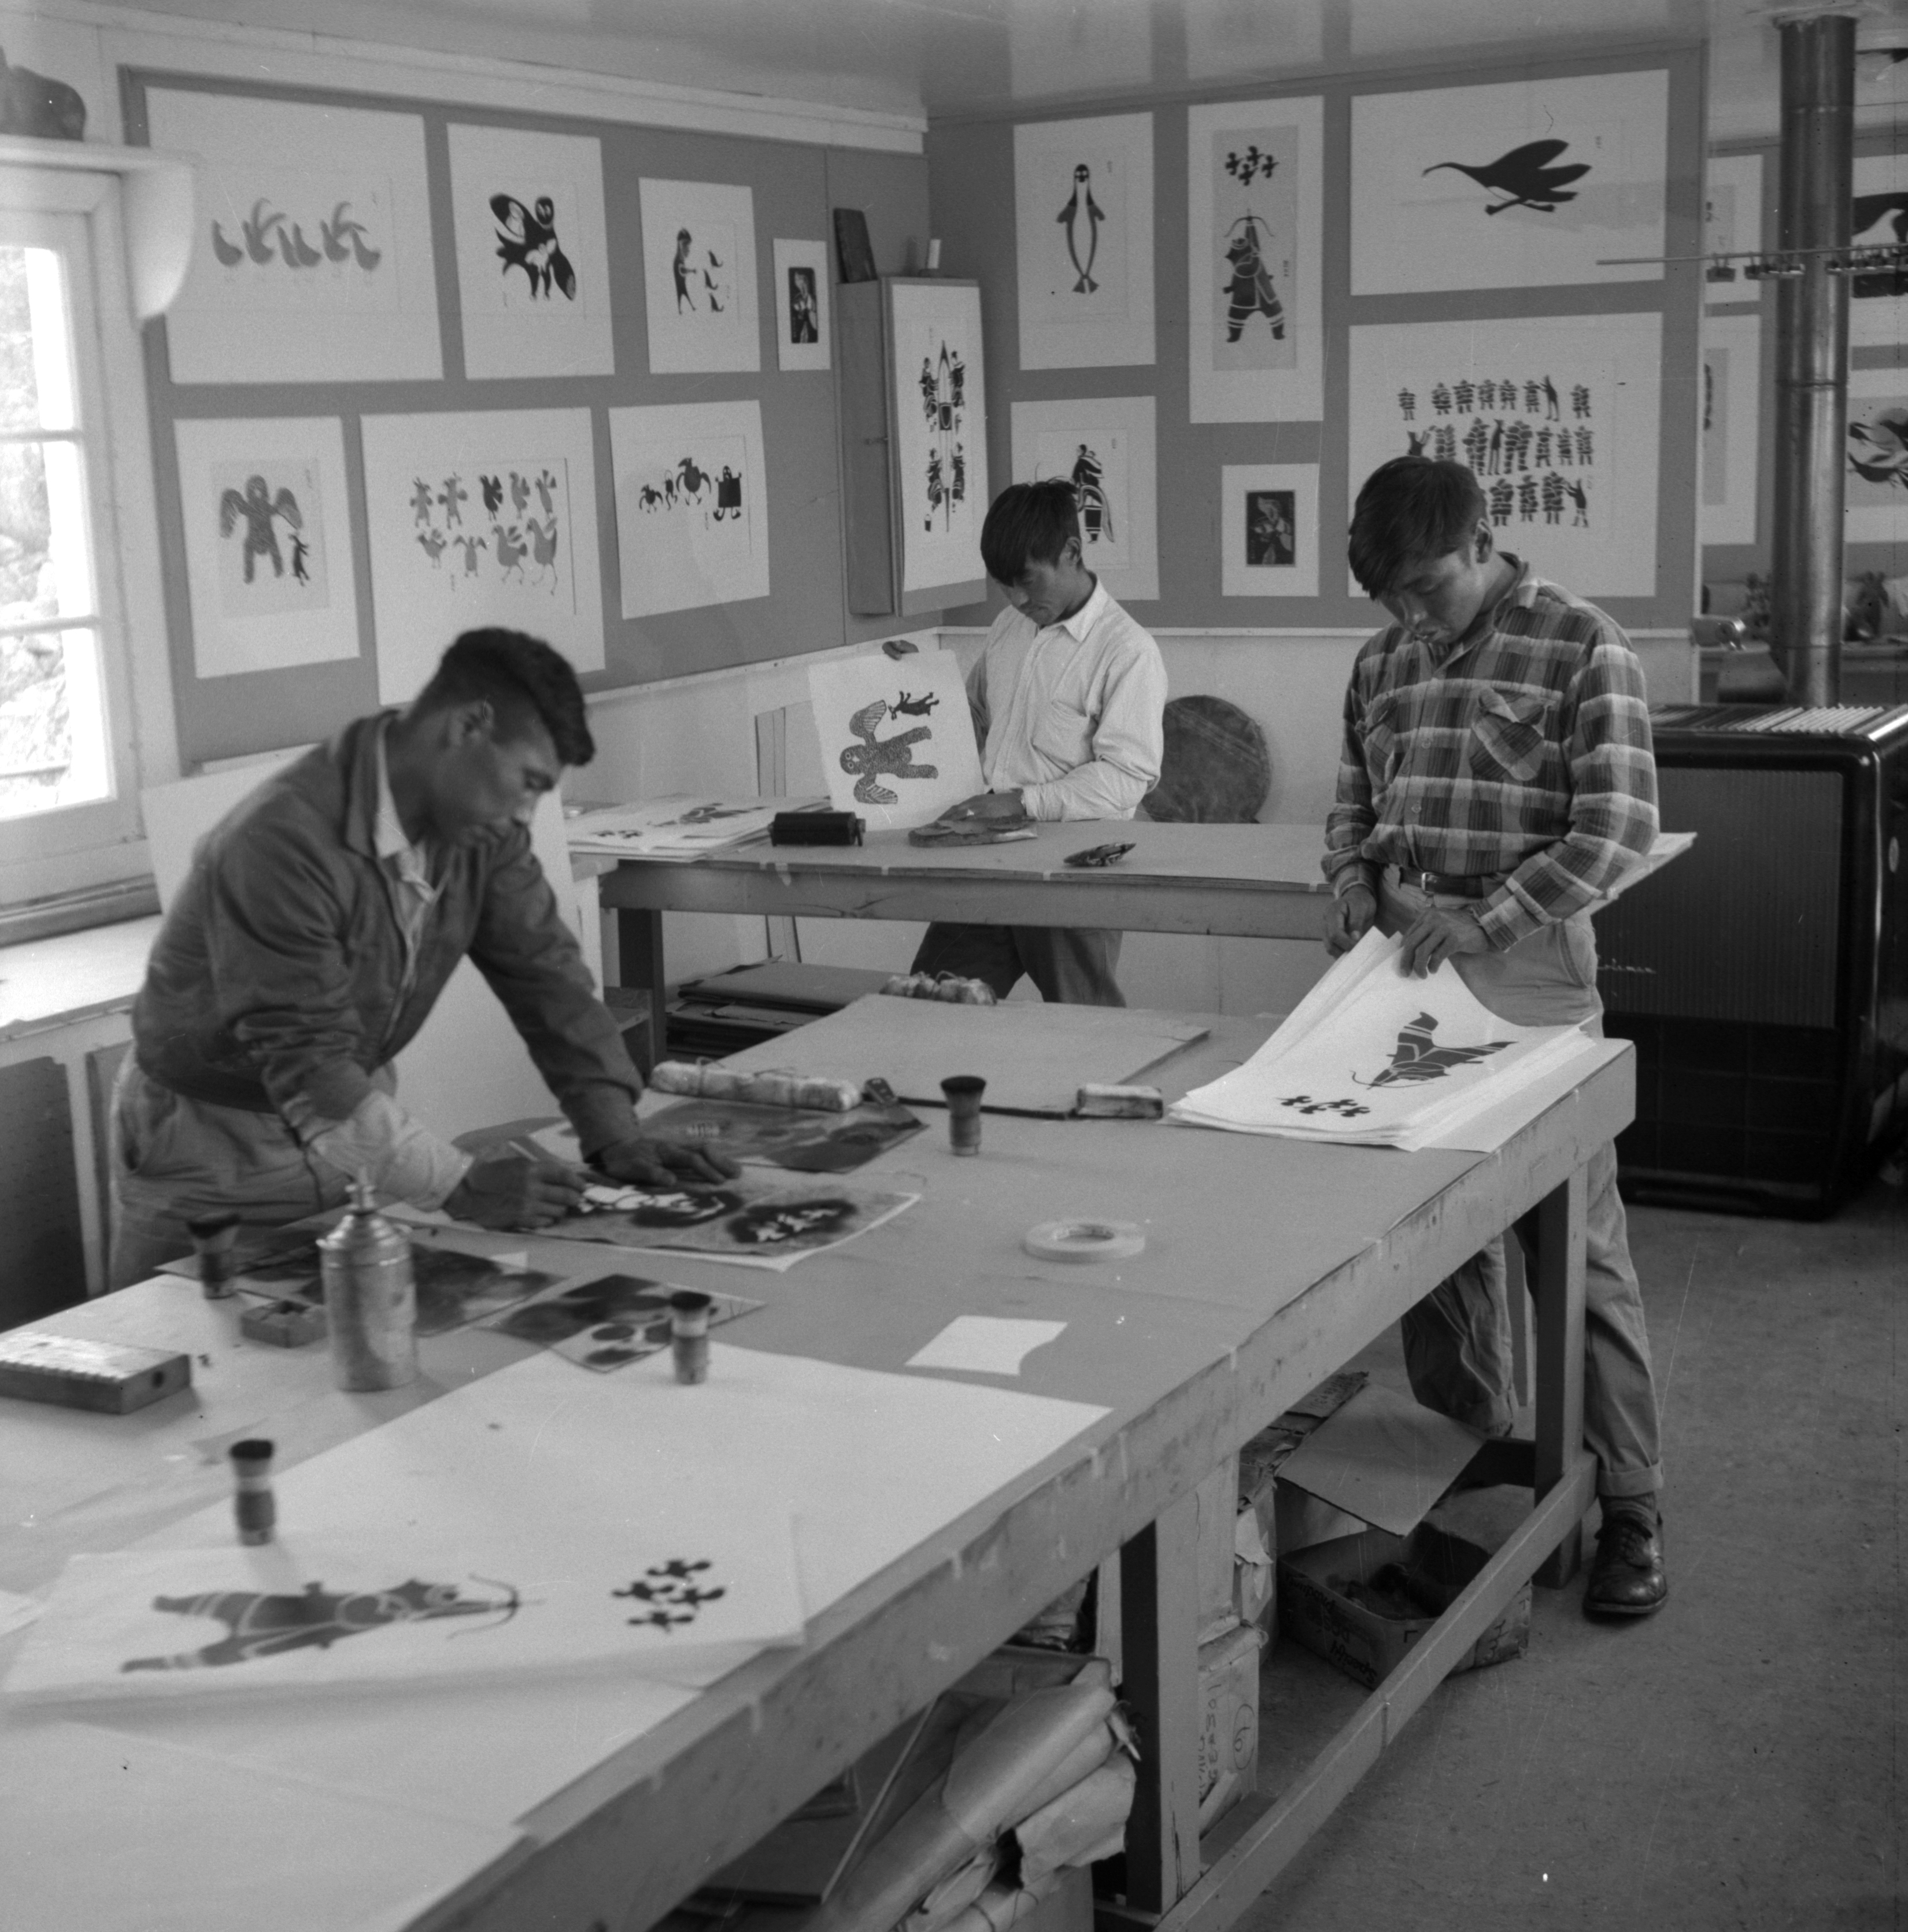  Artists (left to right) Iyola Kingwatsiak, Lukta Qiatsuq and Eegyvudluk Pootoogook (Inuit) inside the West Baffin Eskimo Co-operative, 1960. (Rosemary Eaton) © Libraries and Archives Canada